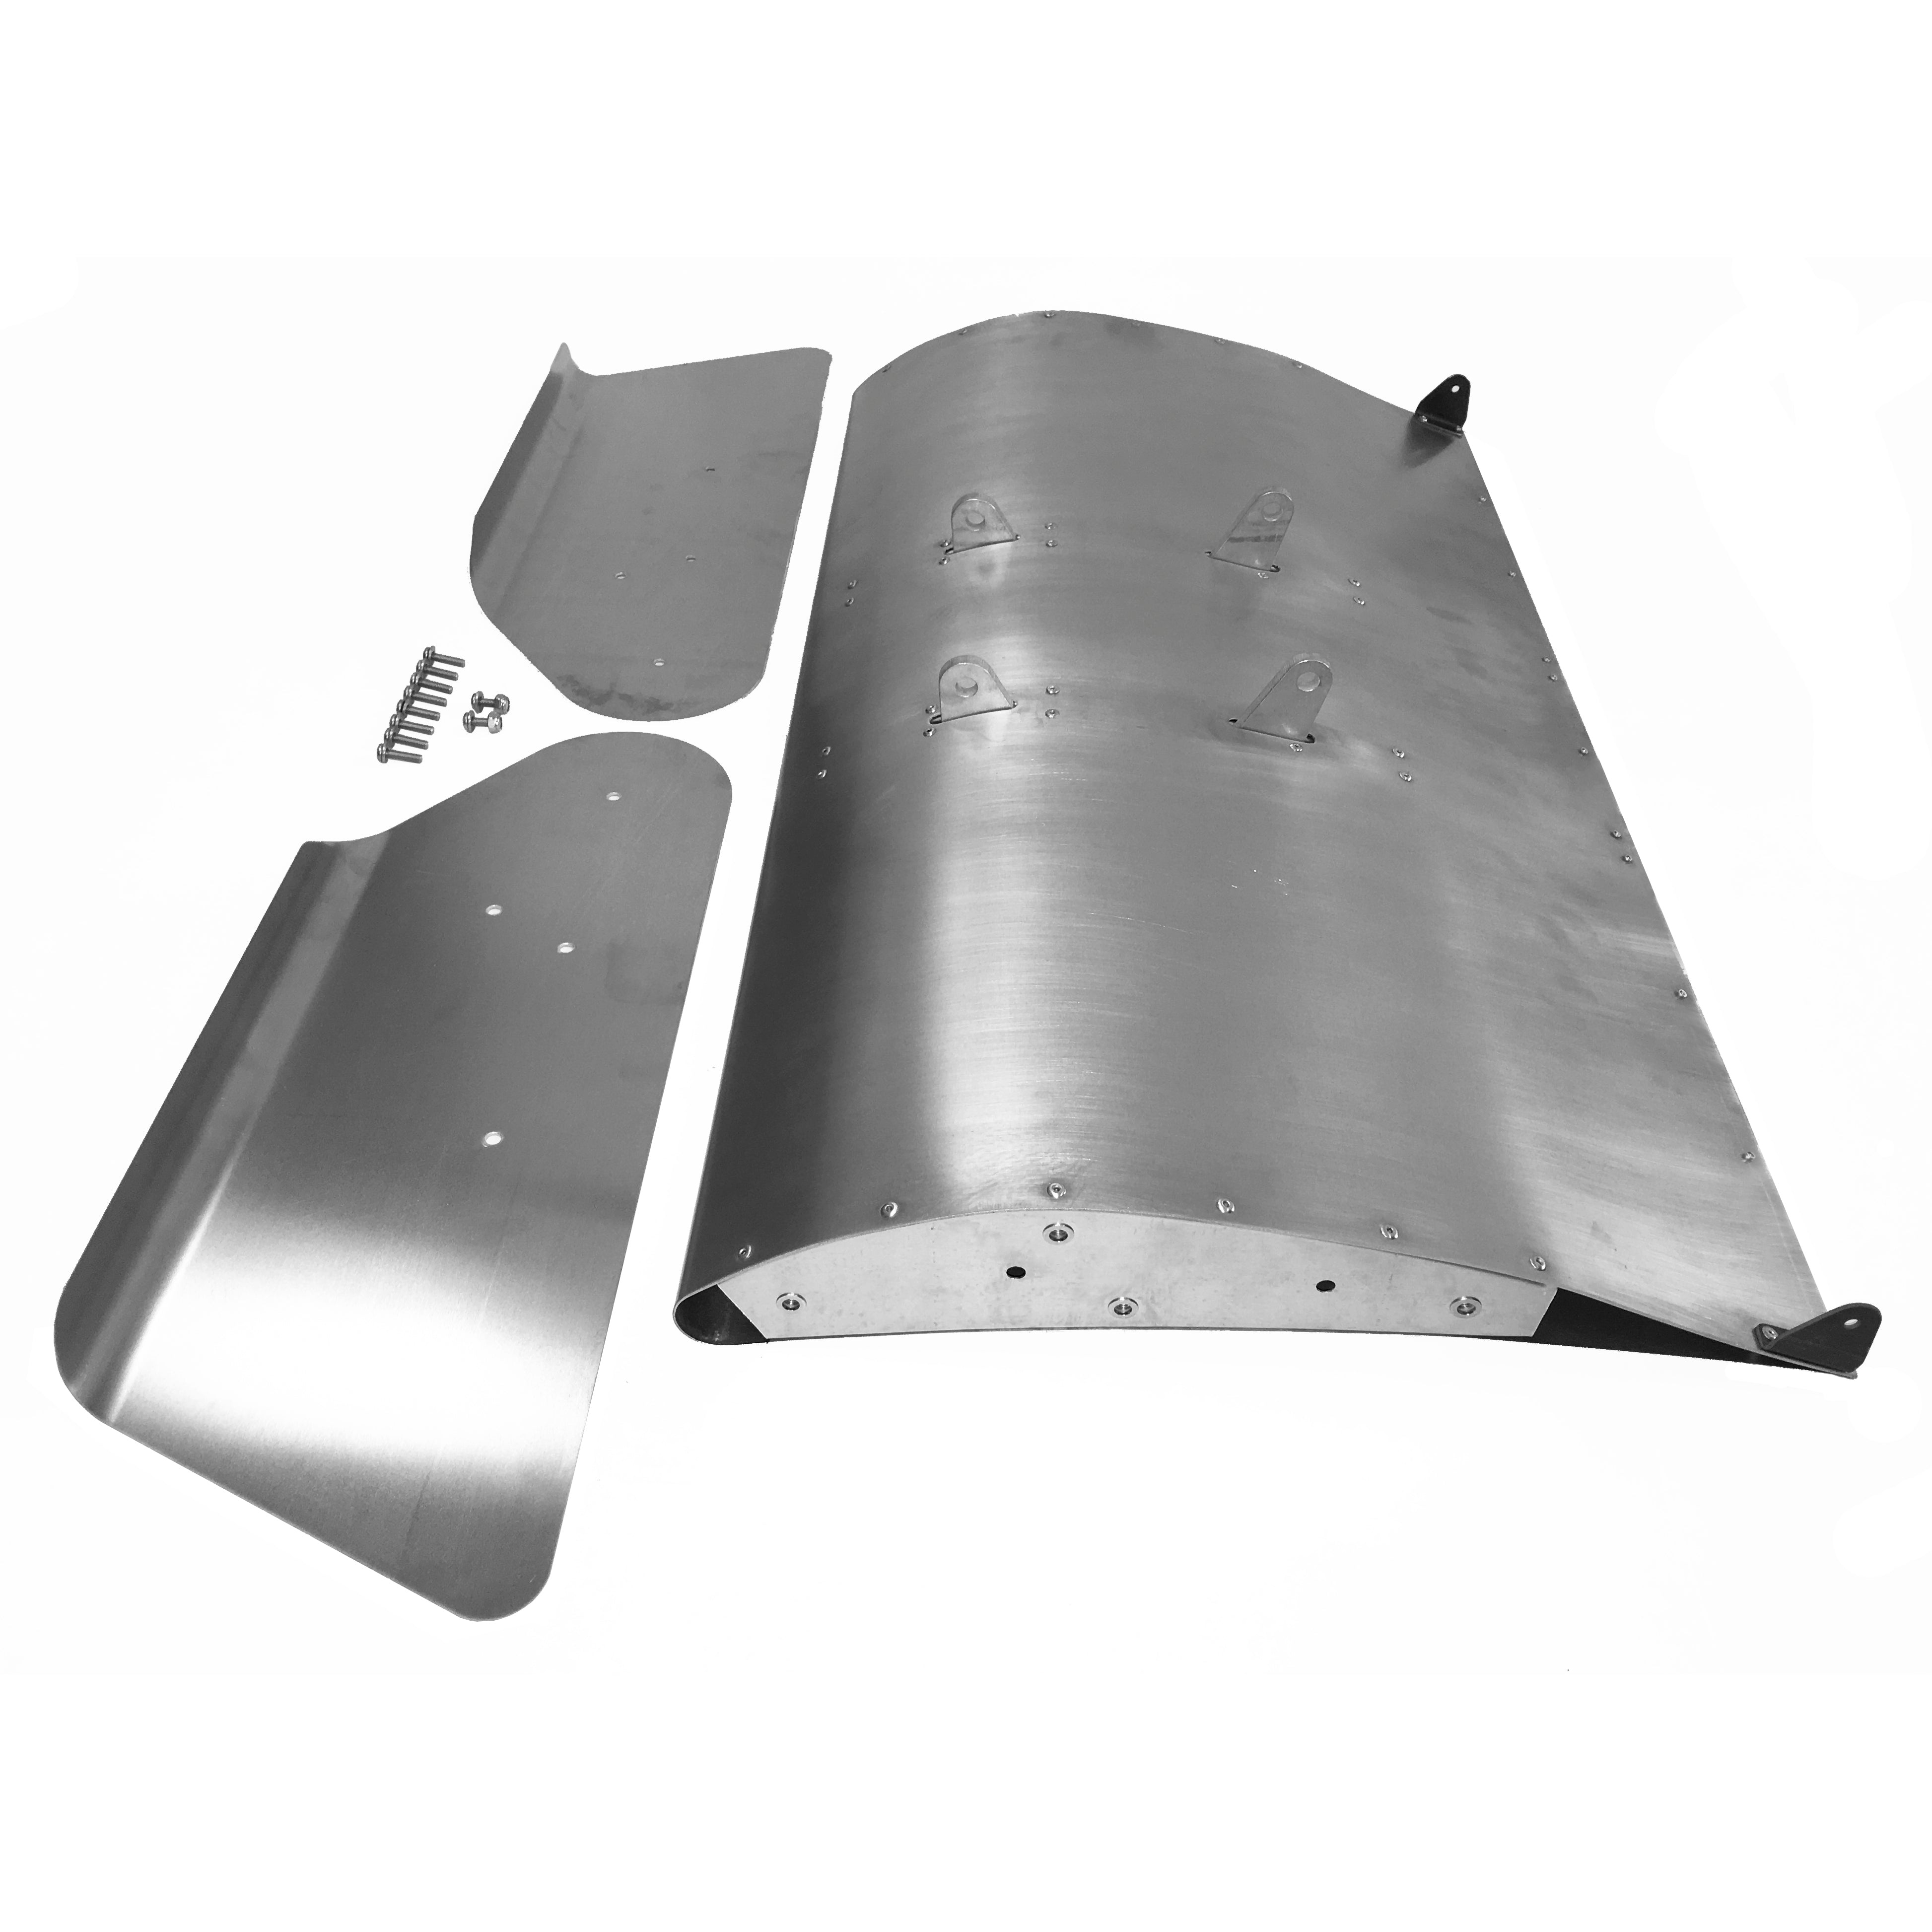 48" Dragster Wing With Top Fuel Spill Plates 05-027TF